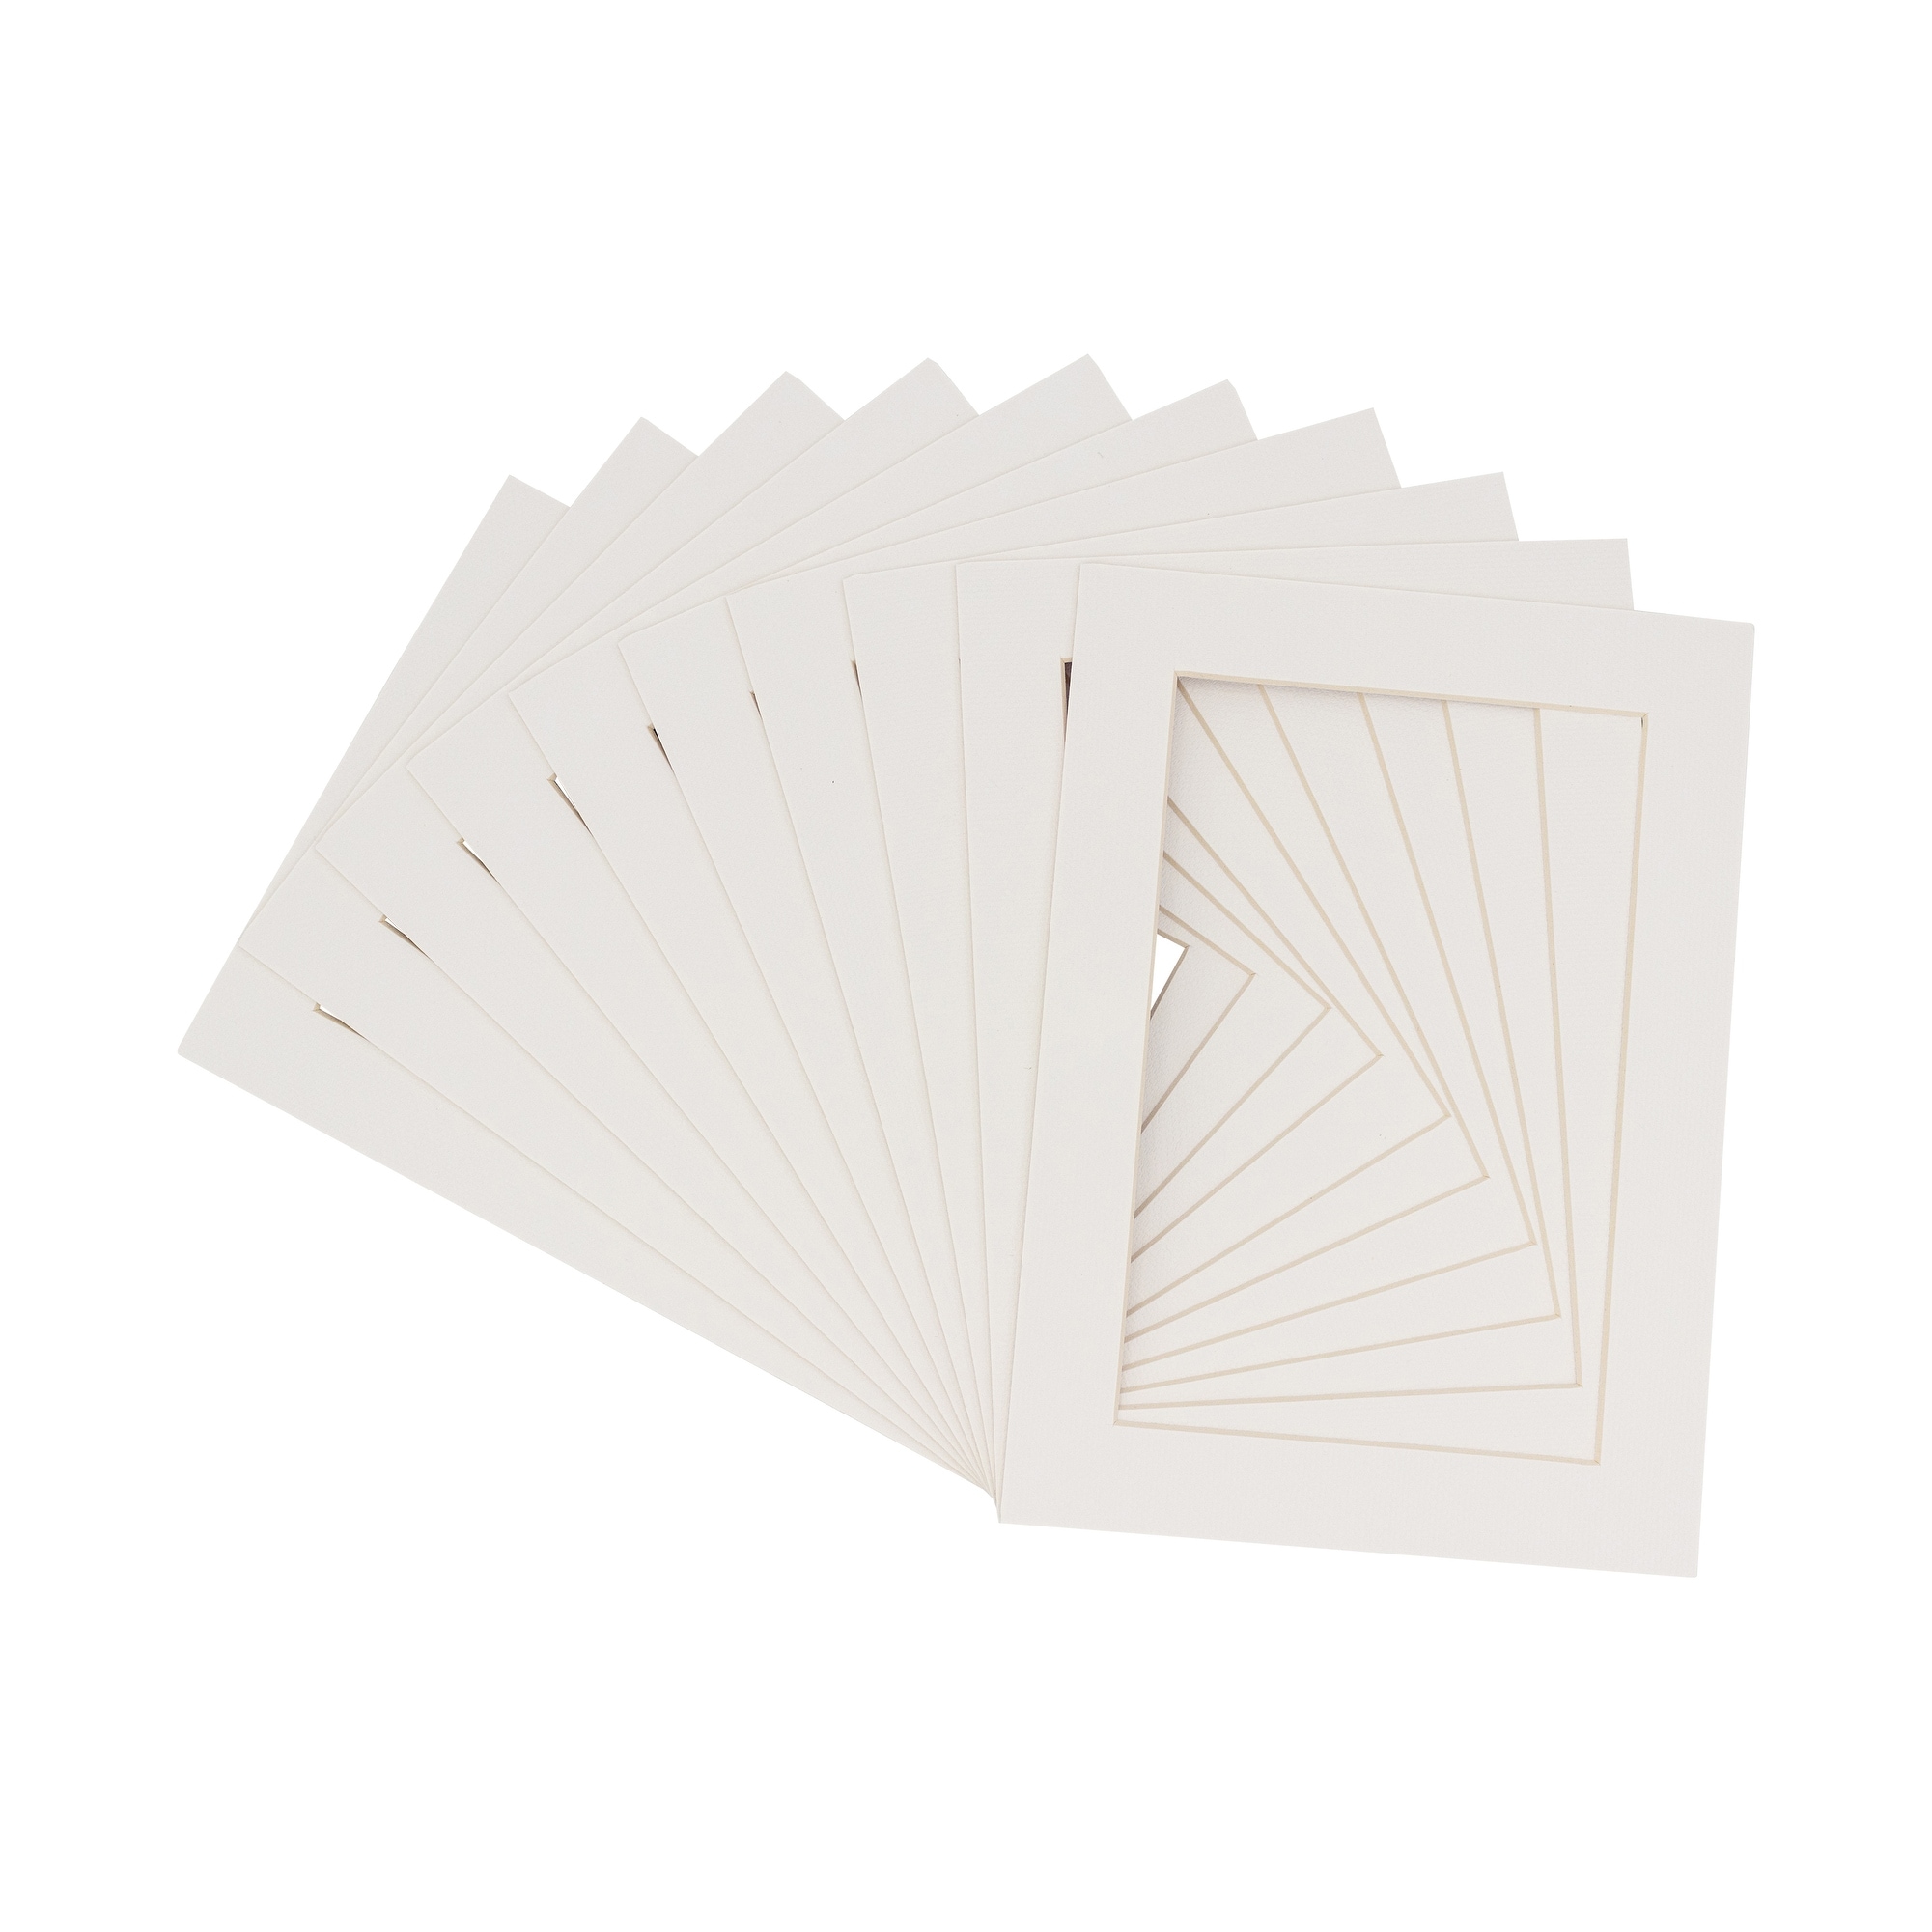 Set of 5-11x14 8-PLY White Gallery Mats for 4x6 Photos